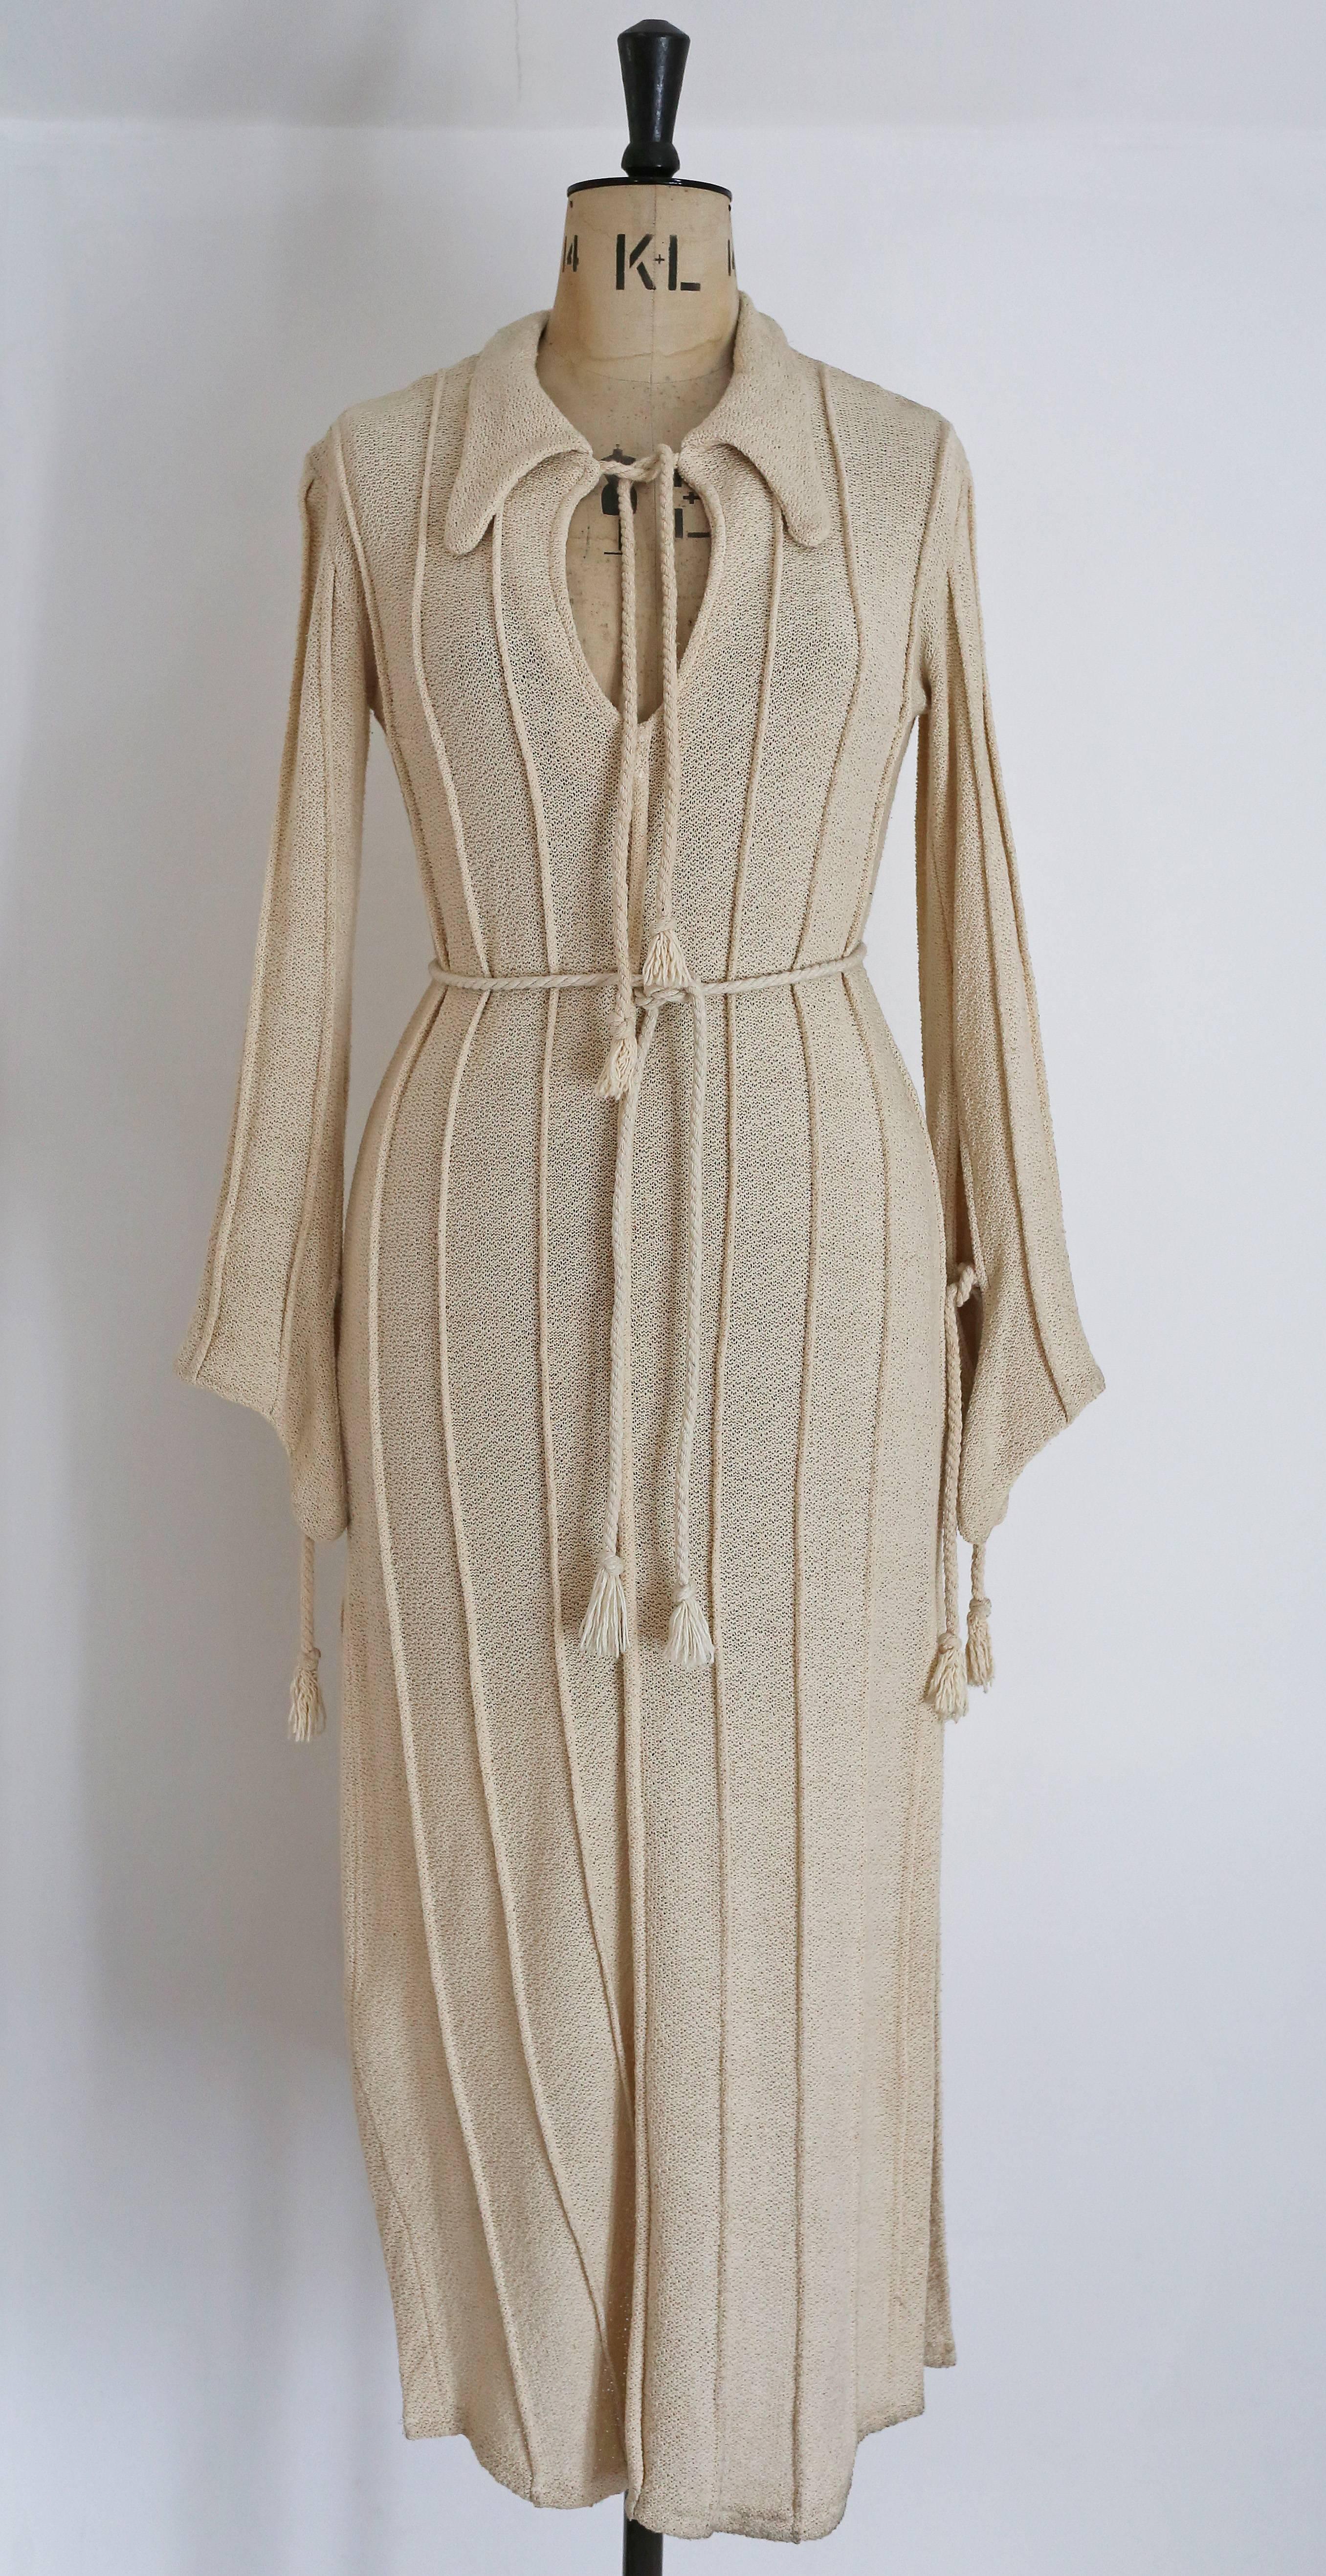 Ivory knitted caftan by Alexander Campbell, circa 1990s. The caftan features several ties with tassels, high side slits and dog ear collar. 

Size: Medium
Shoulder to shoulder -18